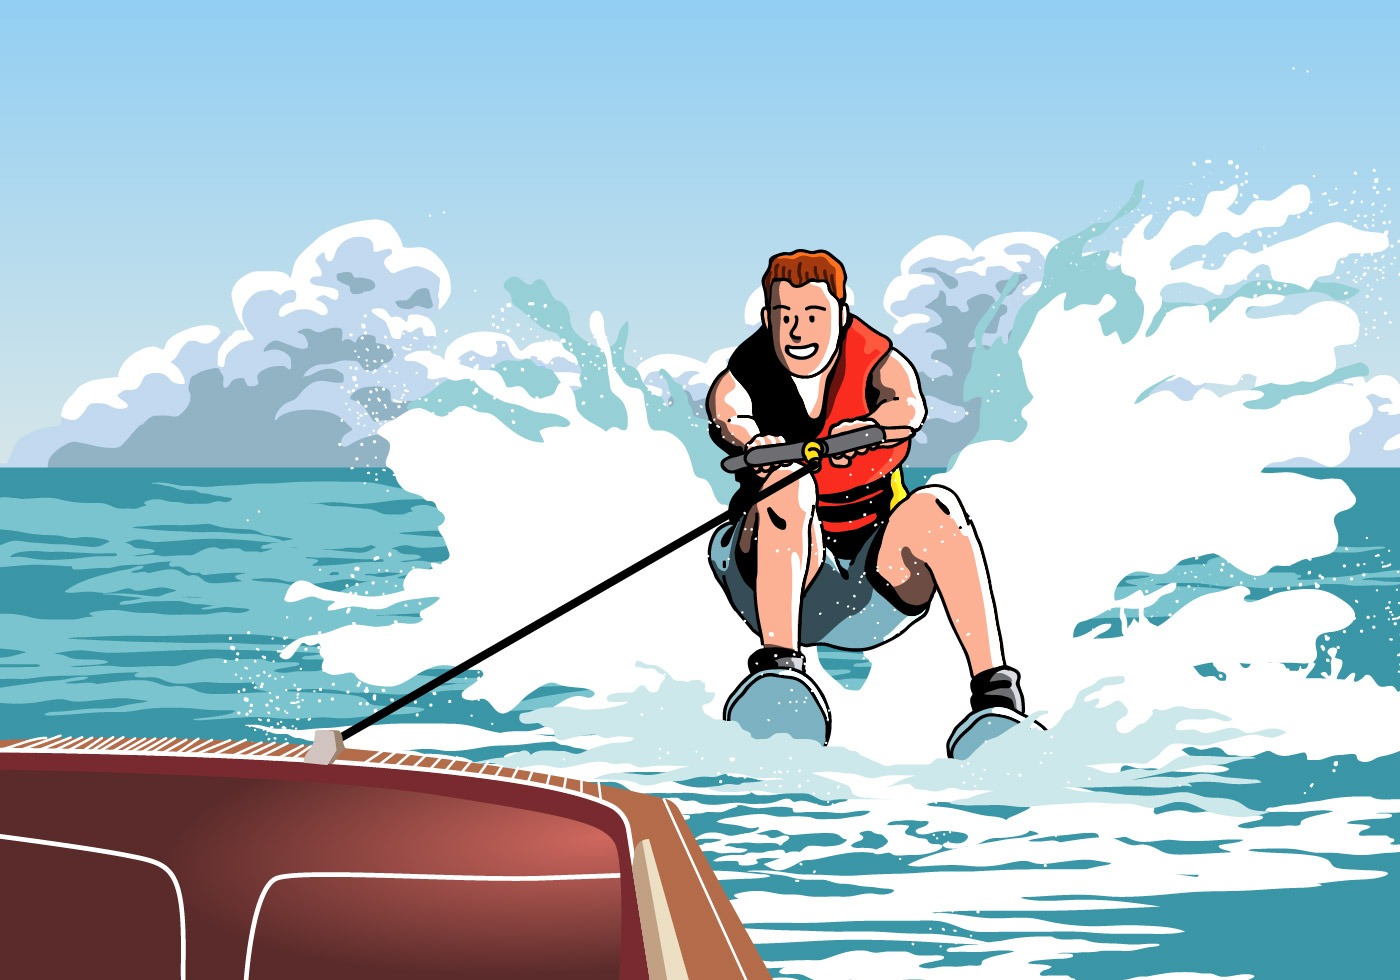 Download the Man Riding On Water Skiing 137785